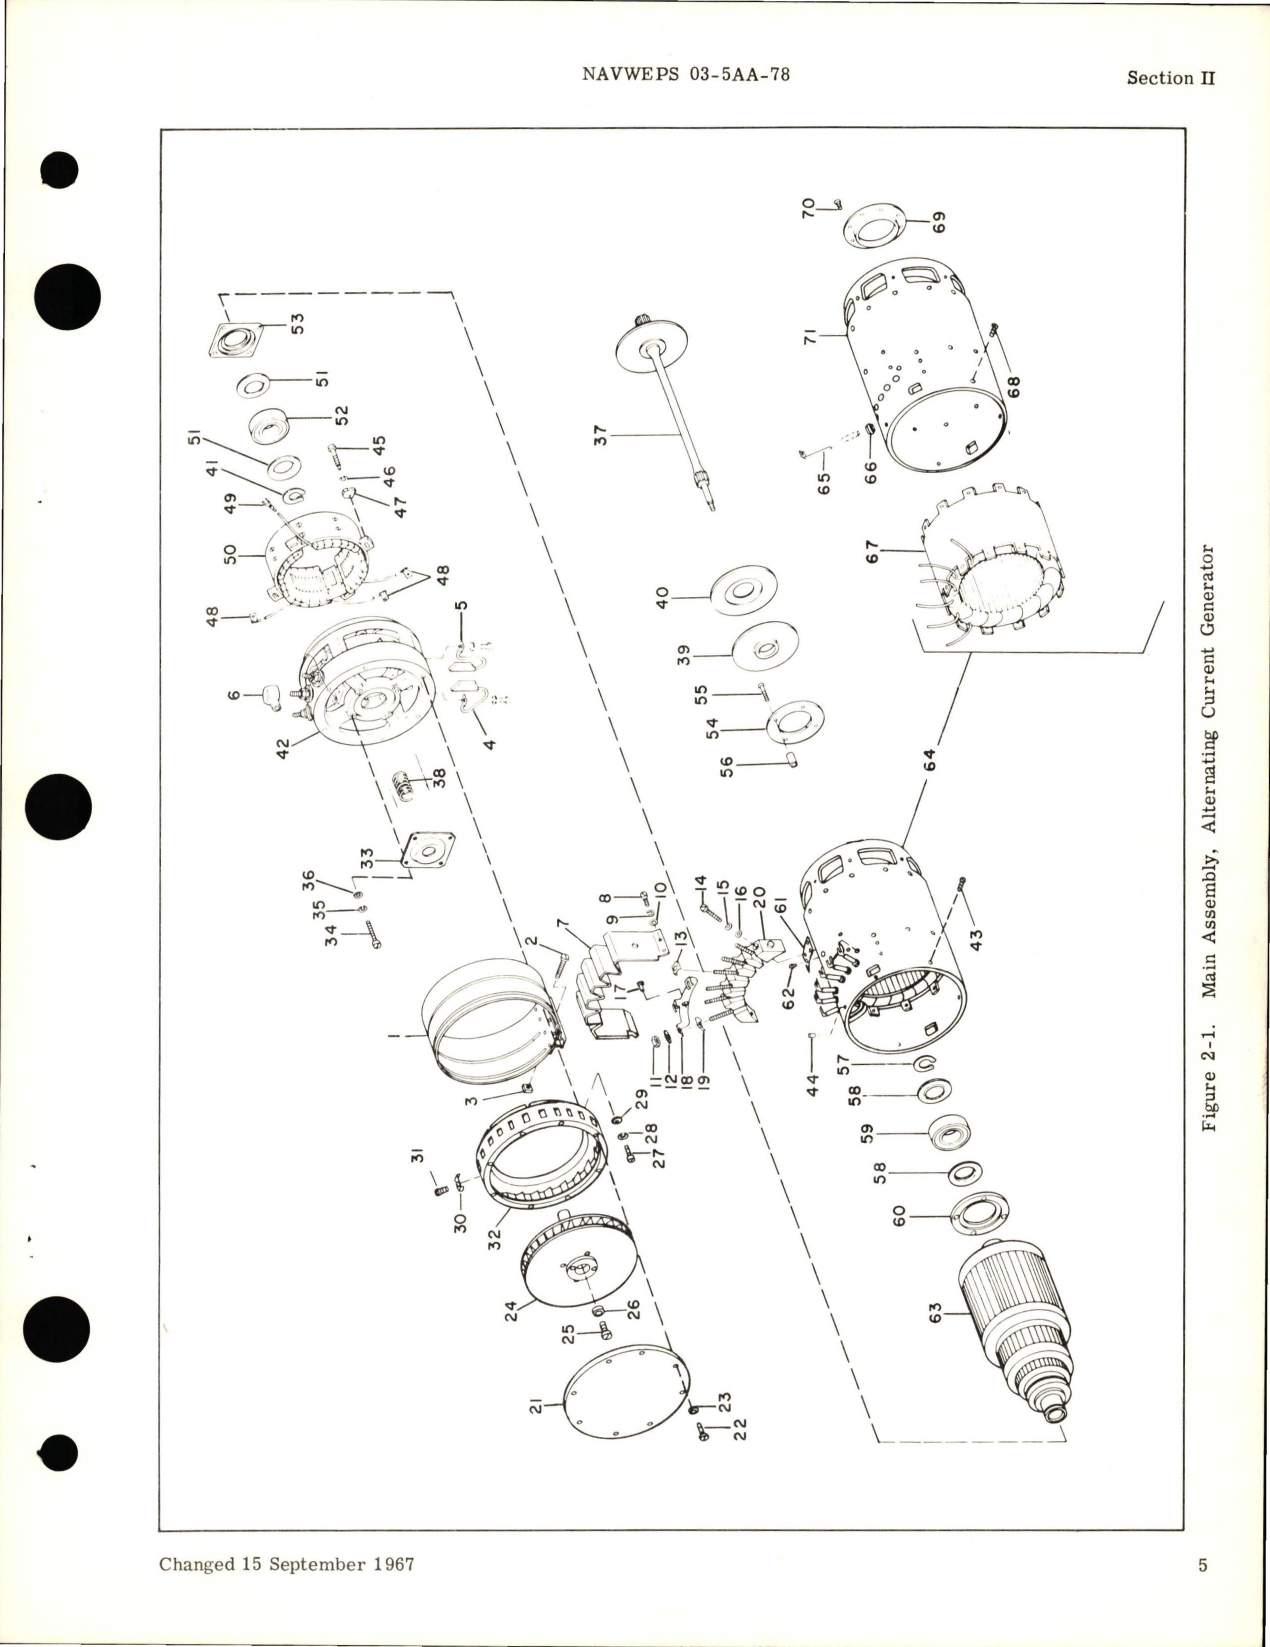 Sample page 9 from AirCorps Library document: Overhaul Instructions for Alternating Current Generator